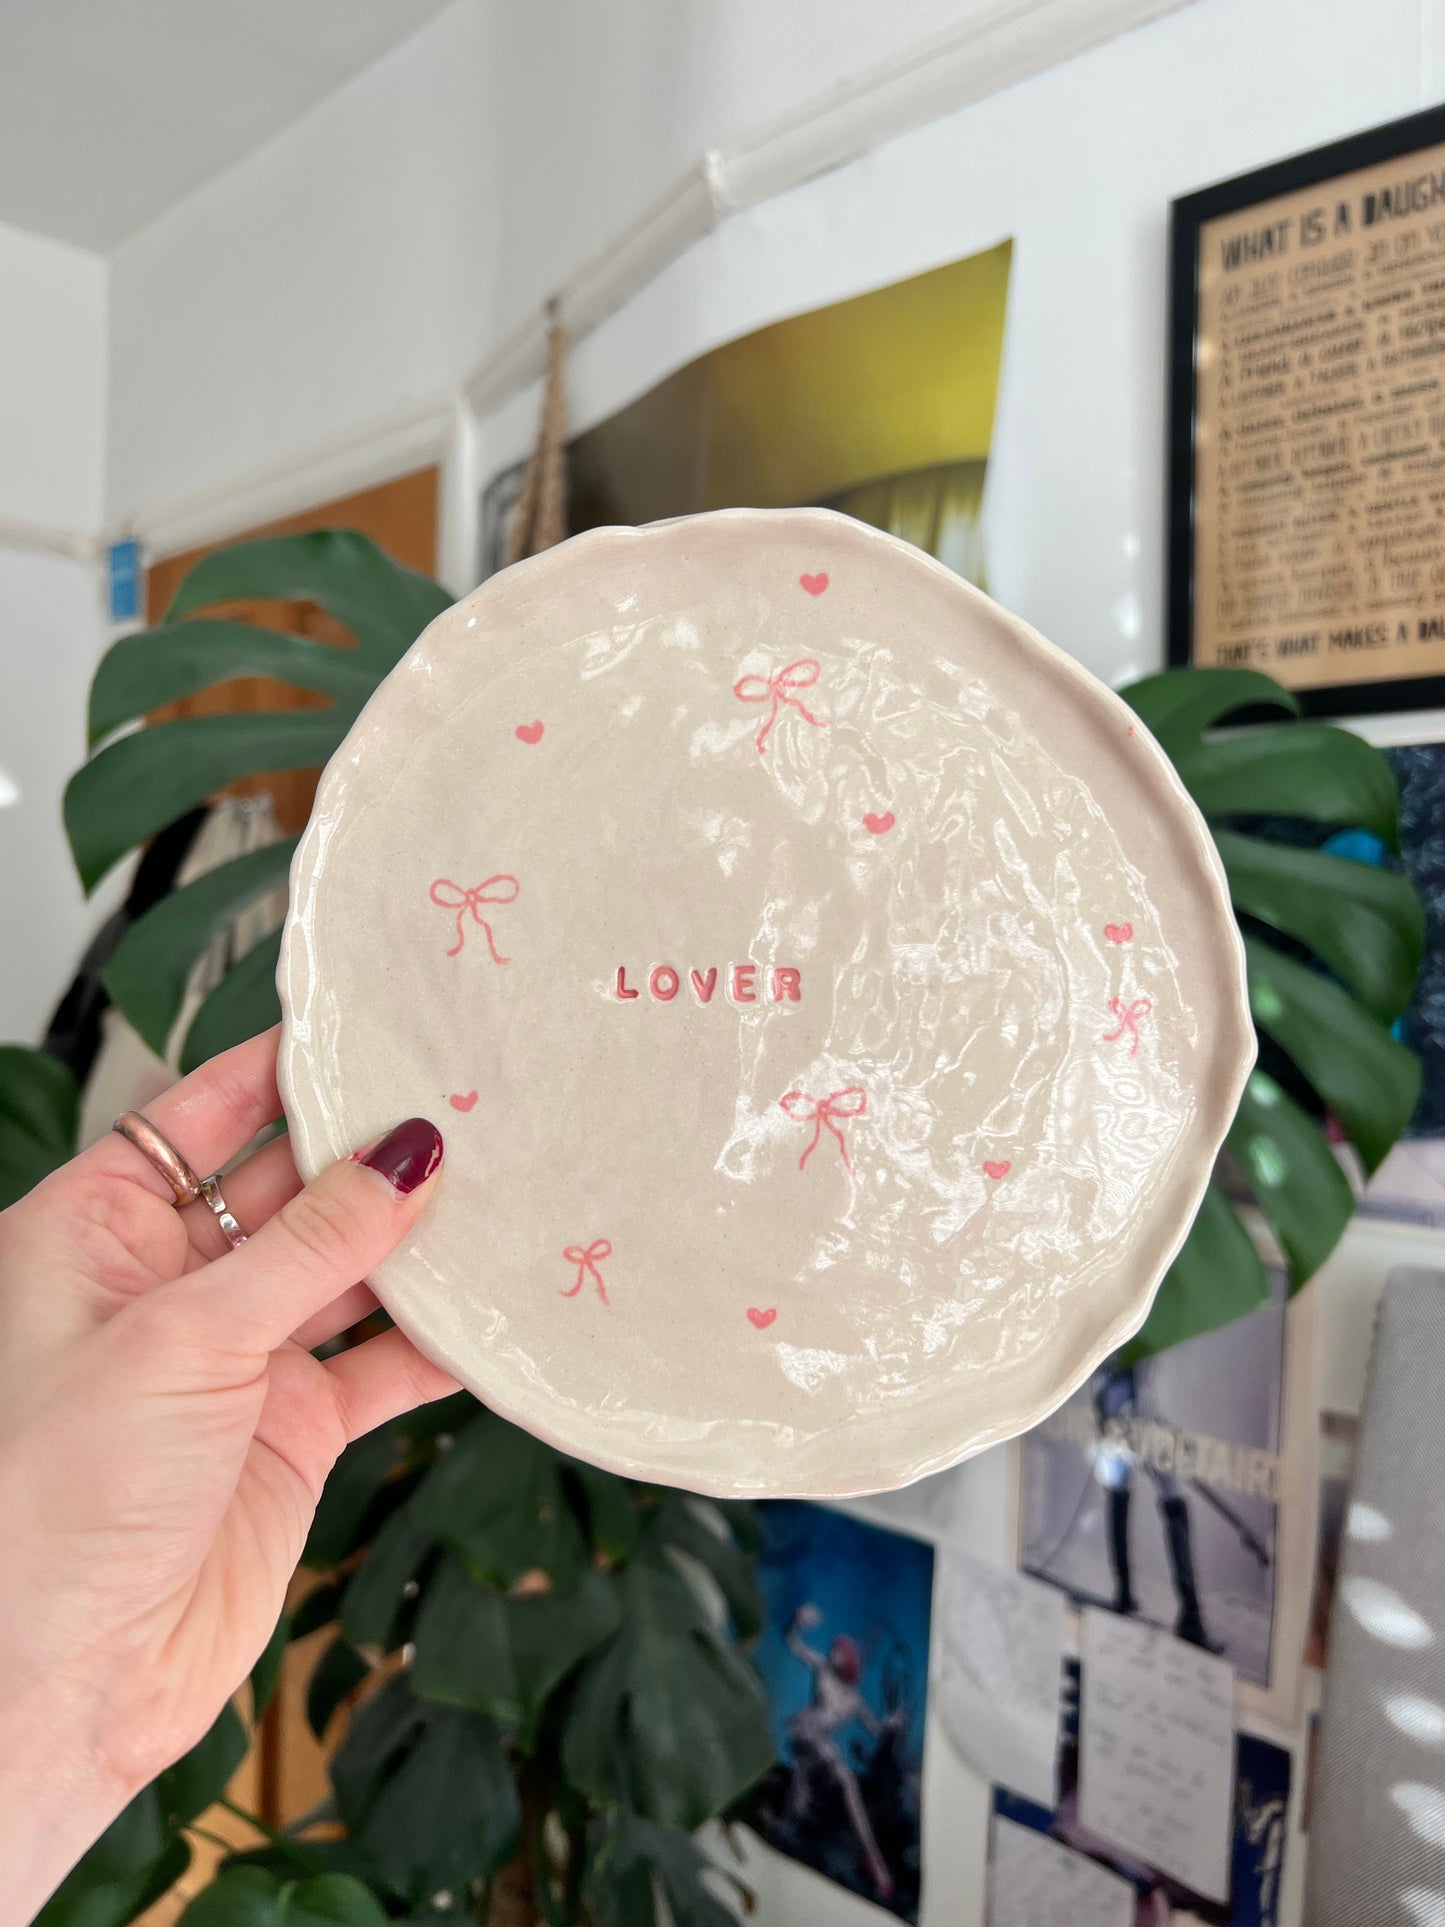 The Lover plate PREORDER